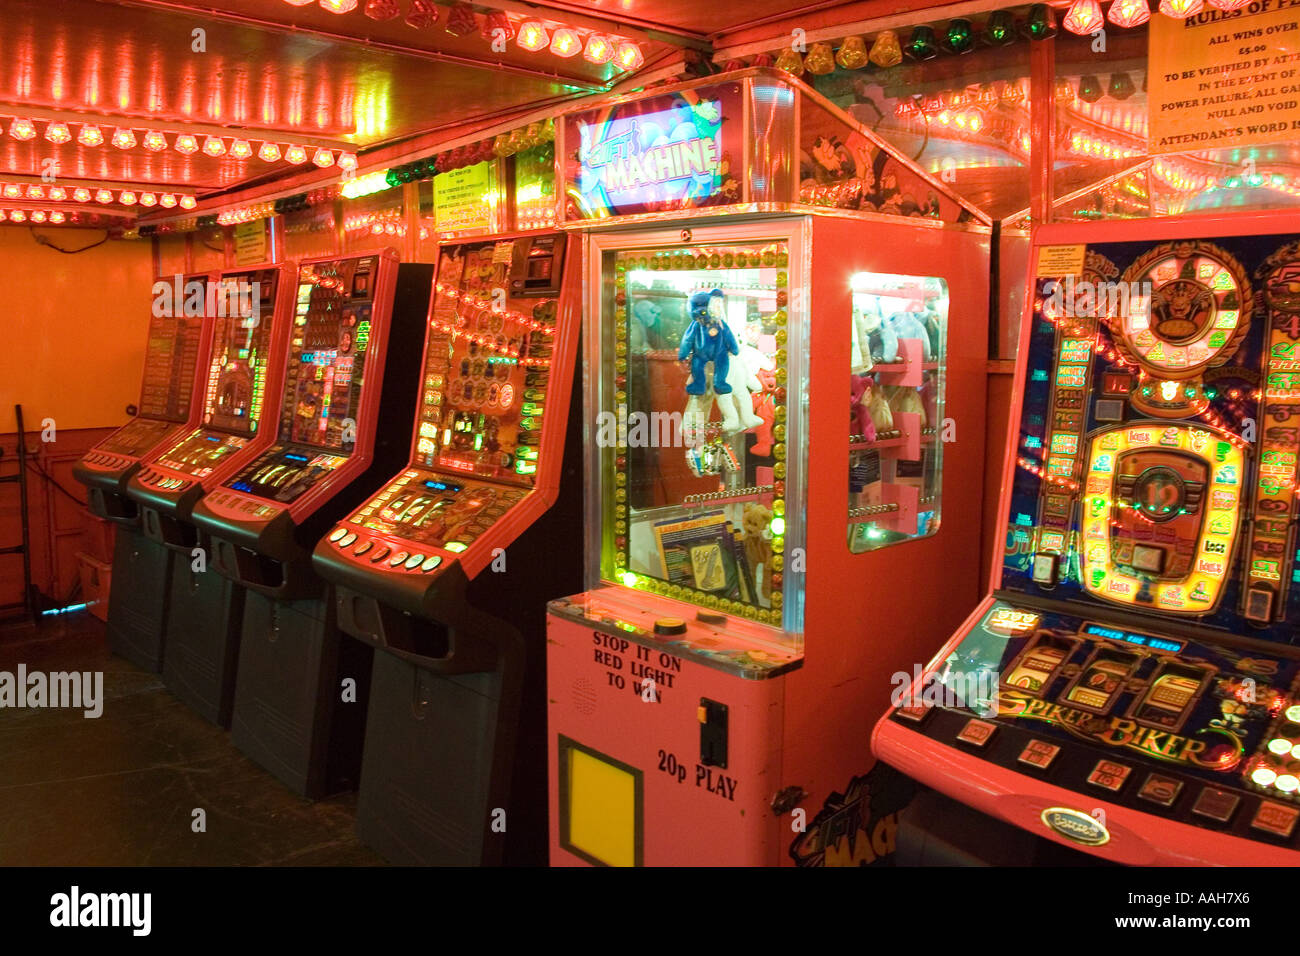 amusement arcade with slot machines at the funfair at Bardwell in Suffolk Stock Photo